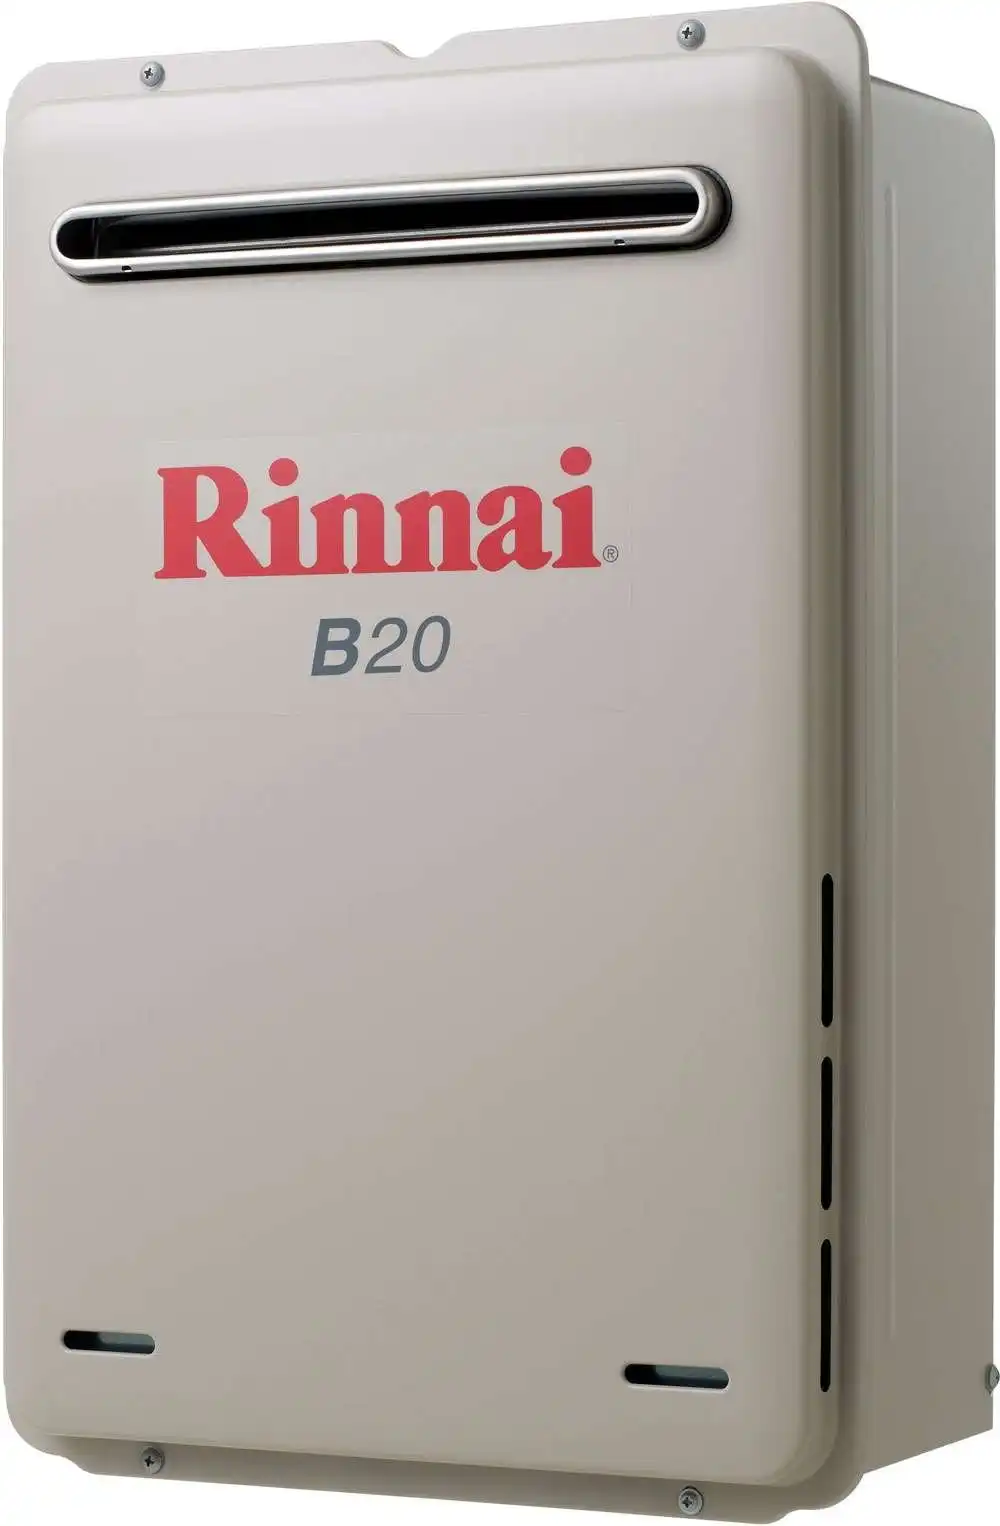 Rinnai Builders 50oC 20L Instant Hot Water System B20N50A B20 *NATURAL GAS*